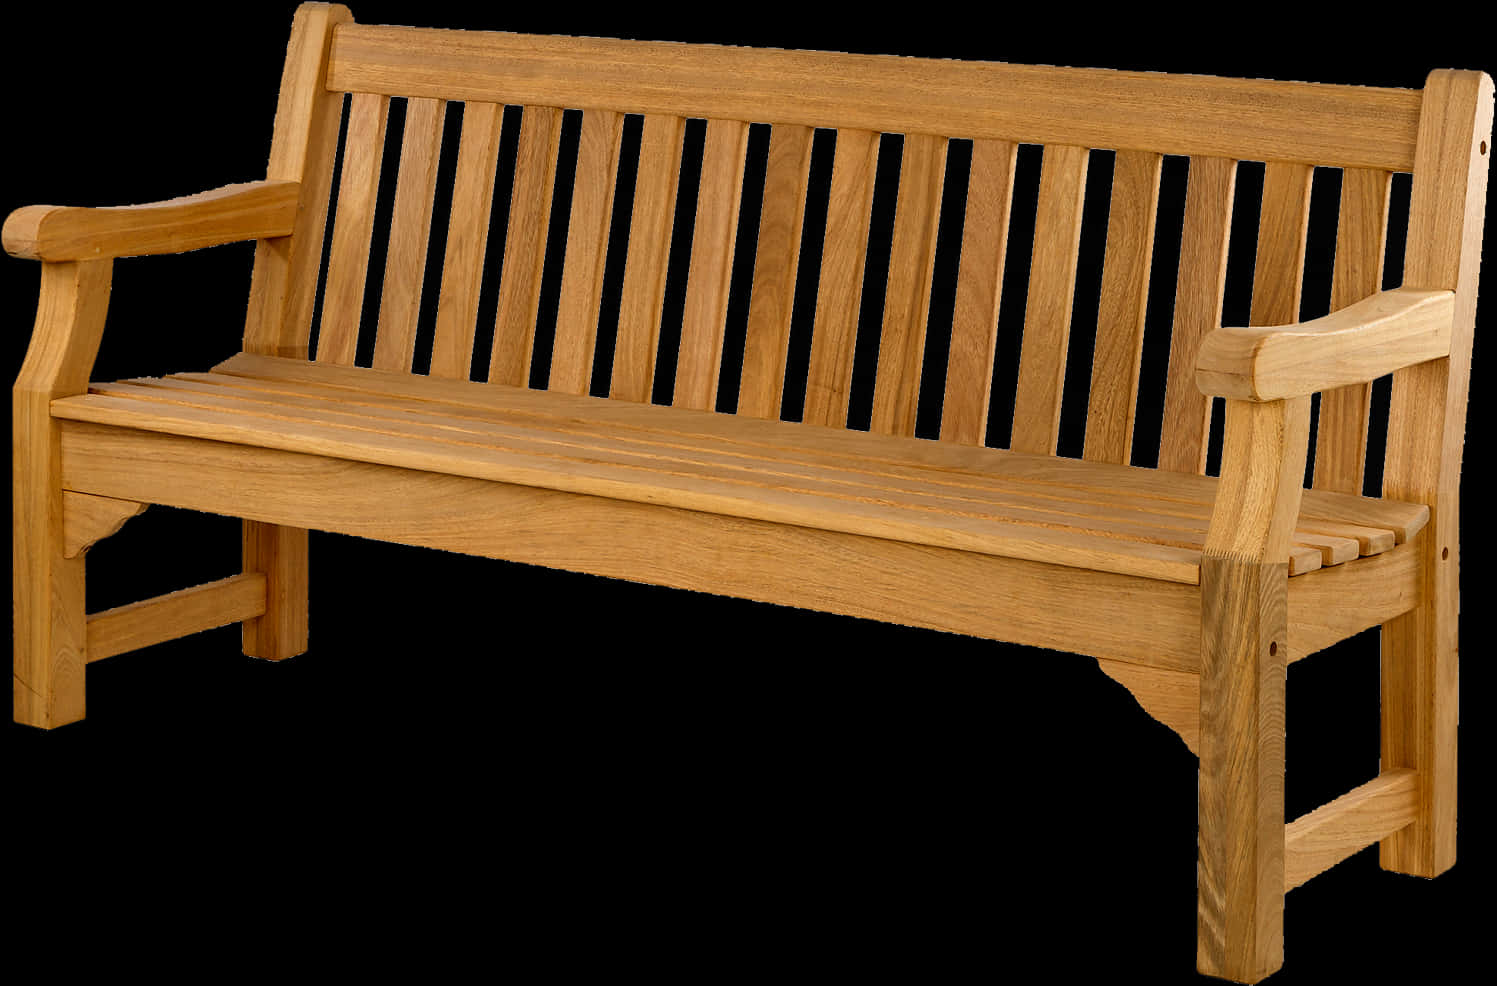 A Wooden Bench With Armrests